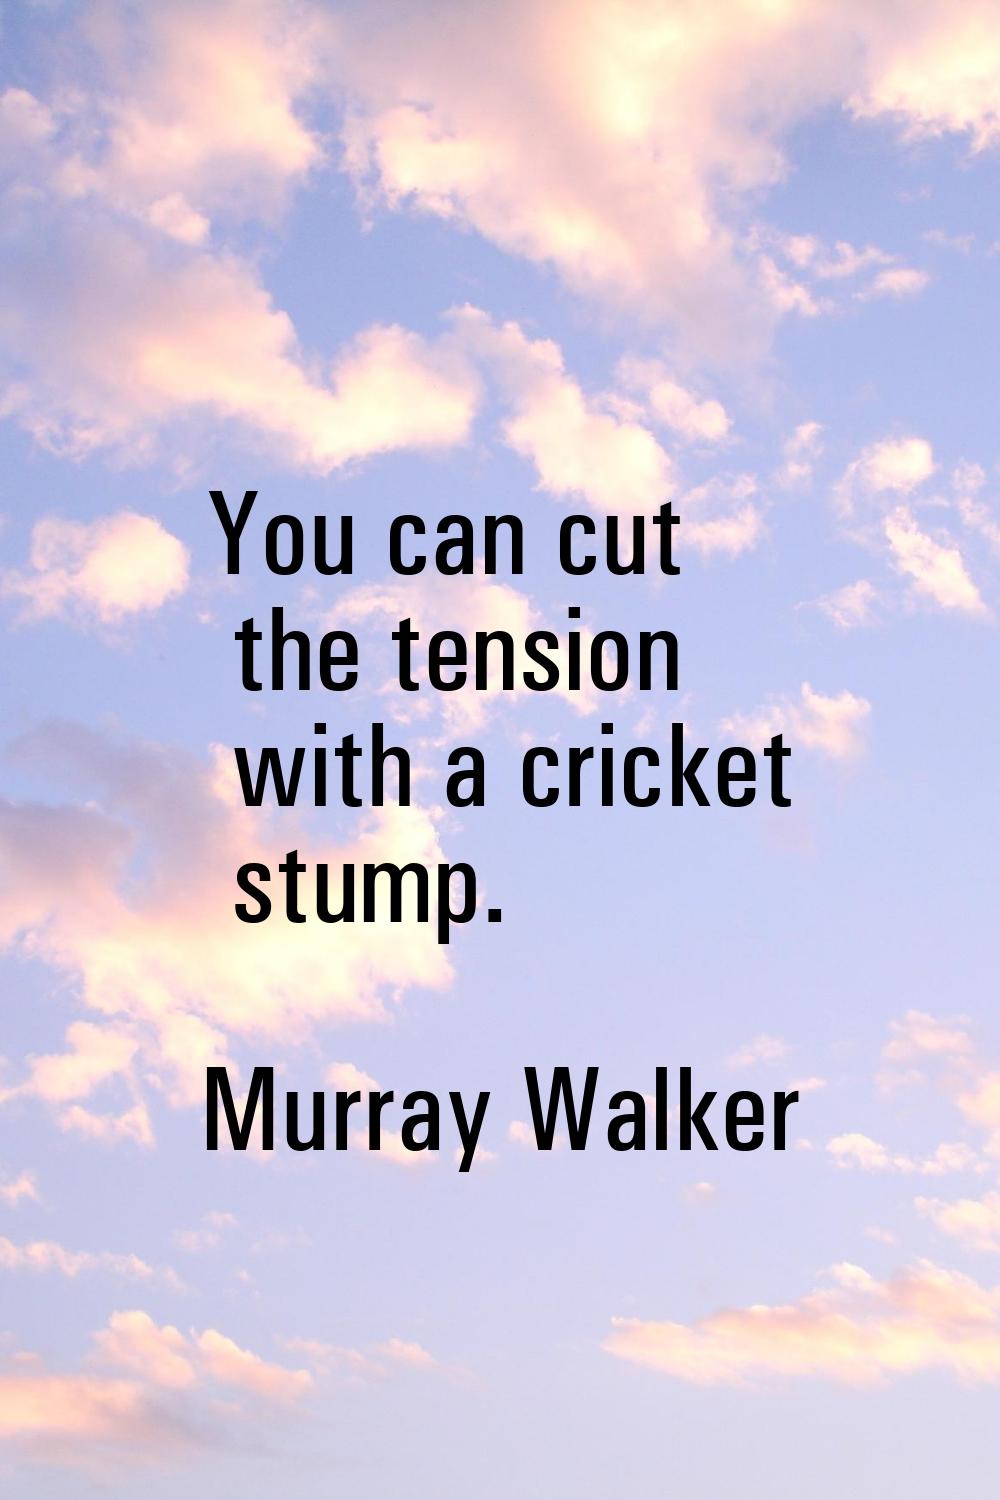 You can cut the tension with a cricket stump.